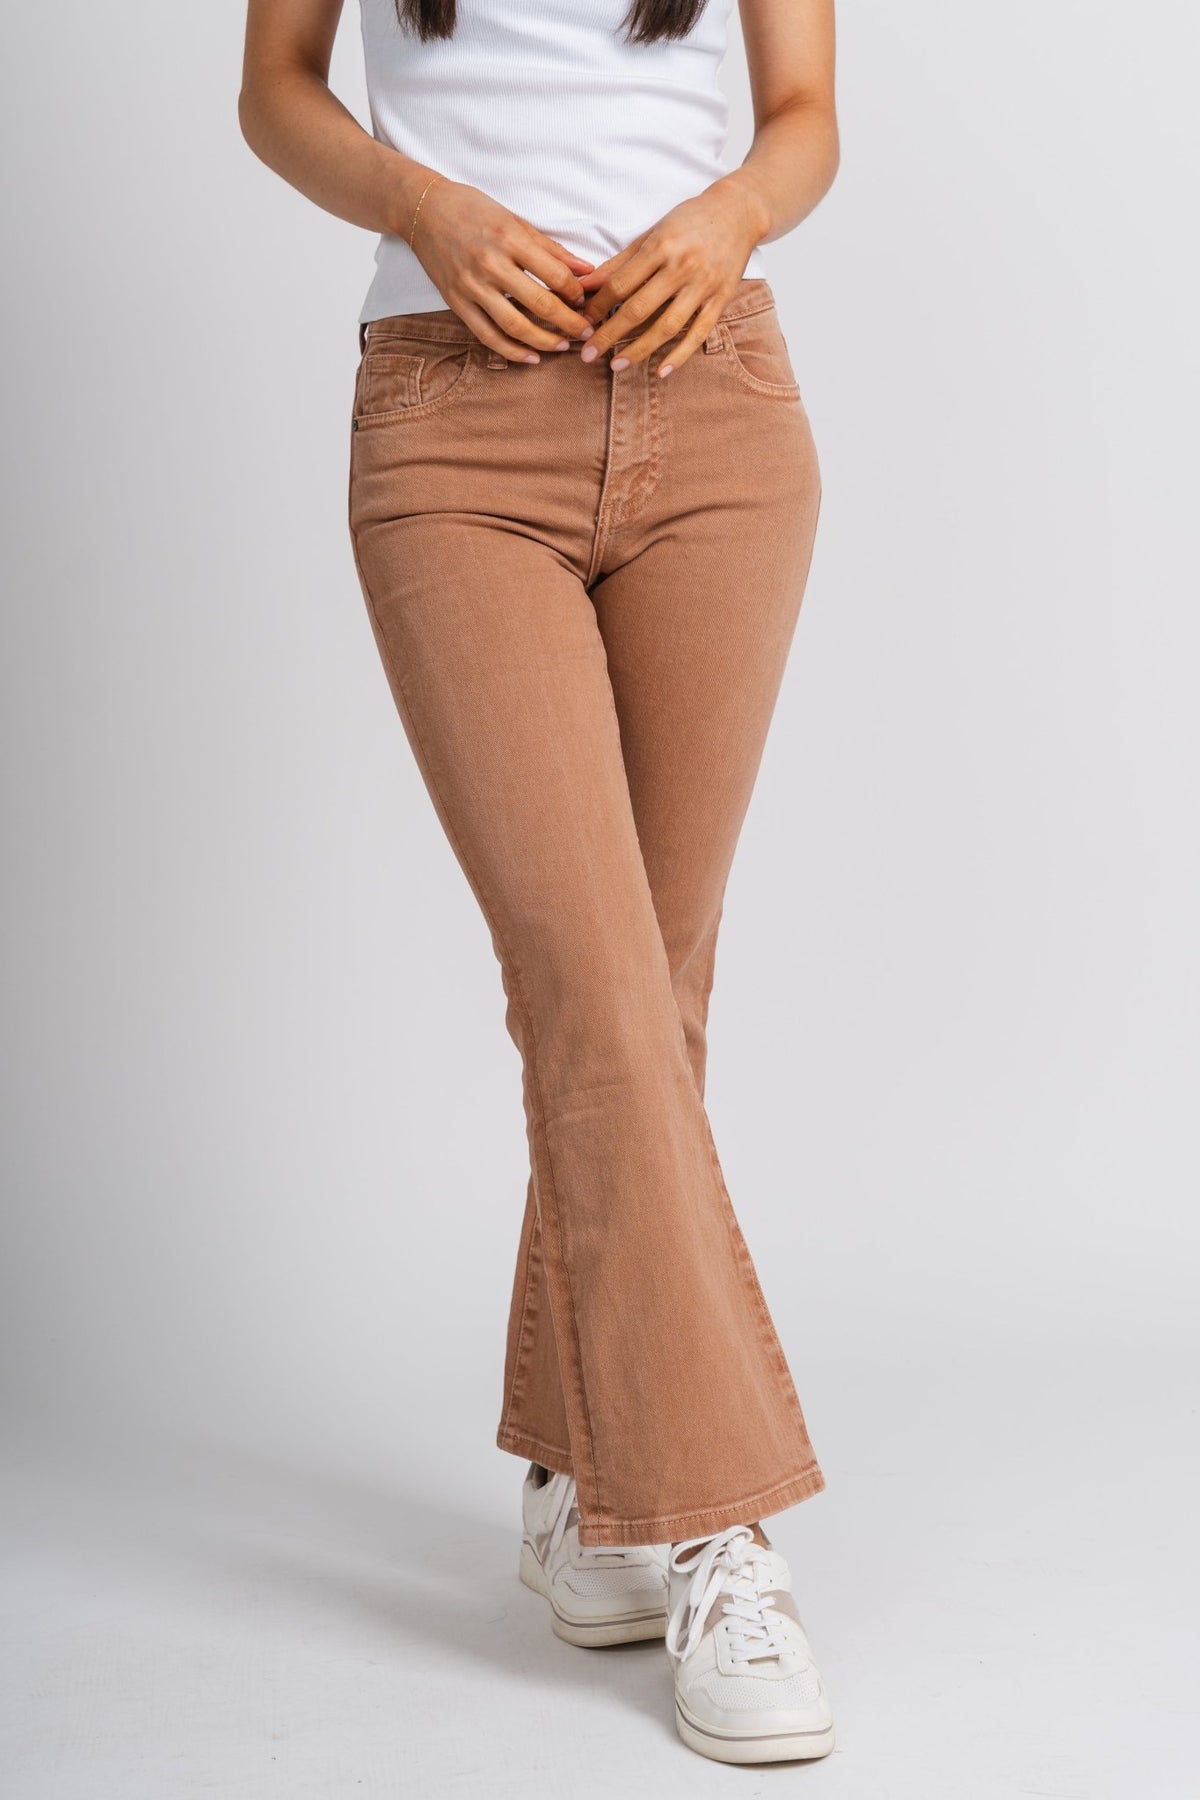 High waist flare jeans camel | Lush Fashion Lounge: boutique women's jeans, fashion jeans for women, affordable fashion jeans, cute boutique jeans